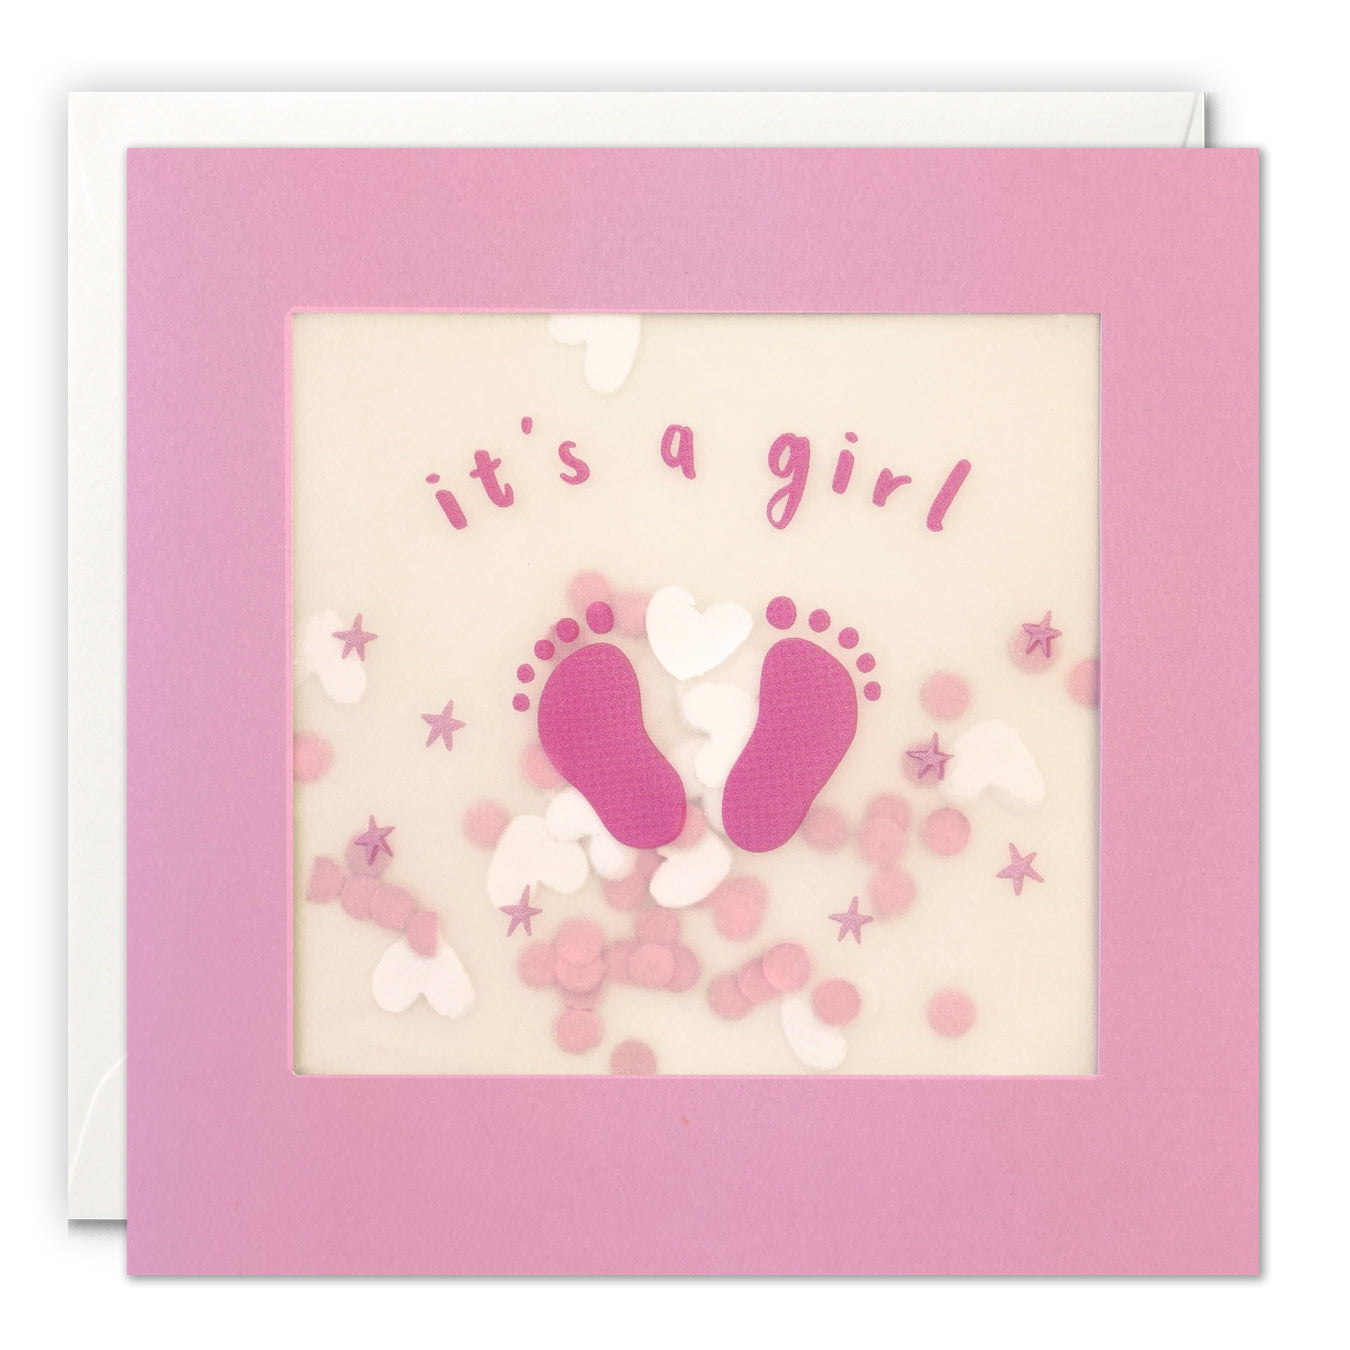 It's a Girl Footprint Shakies New Baby Card from Penny Black